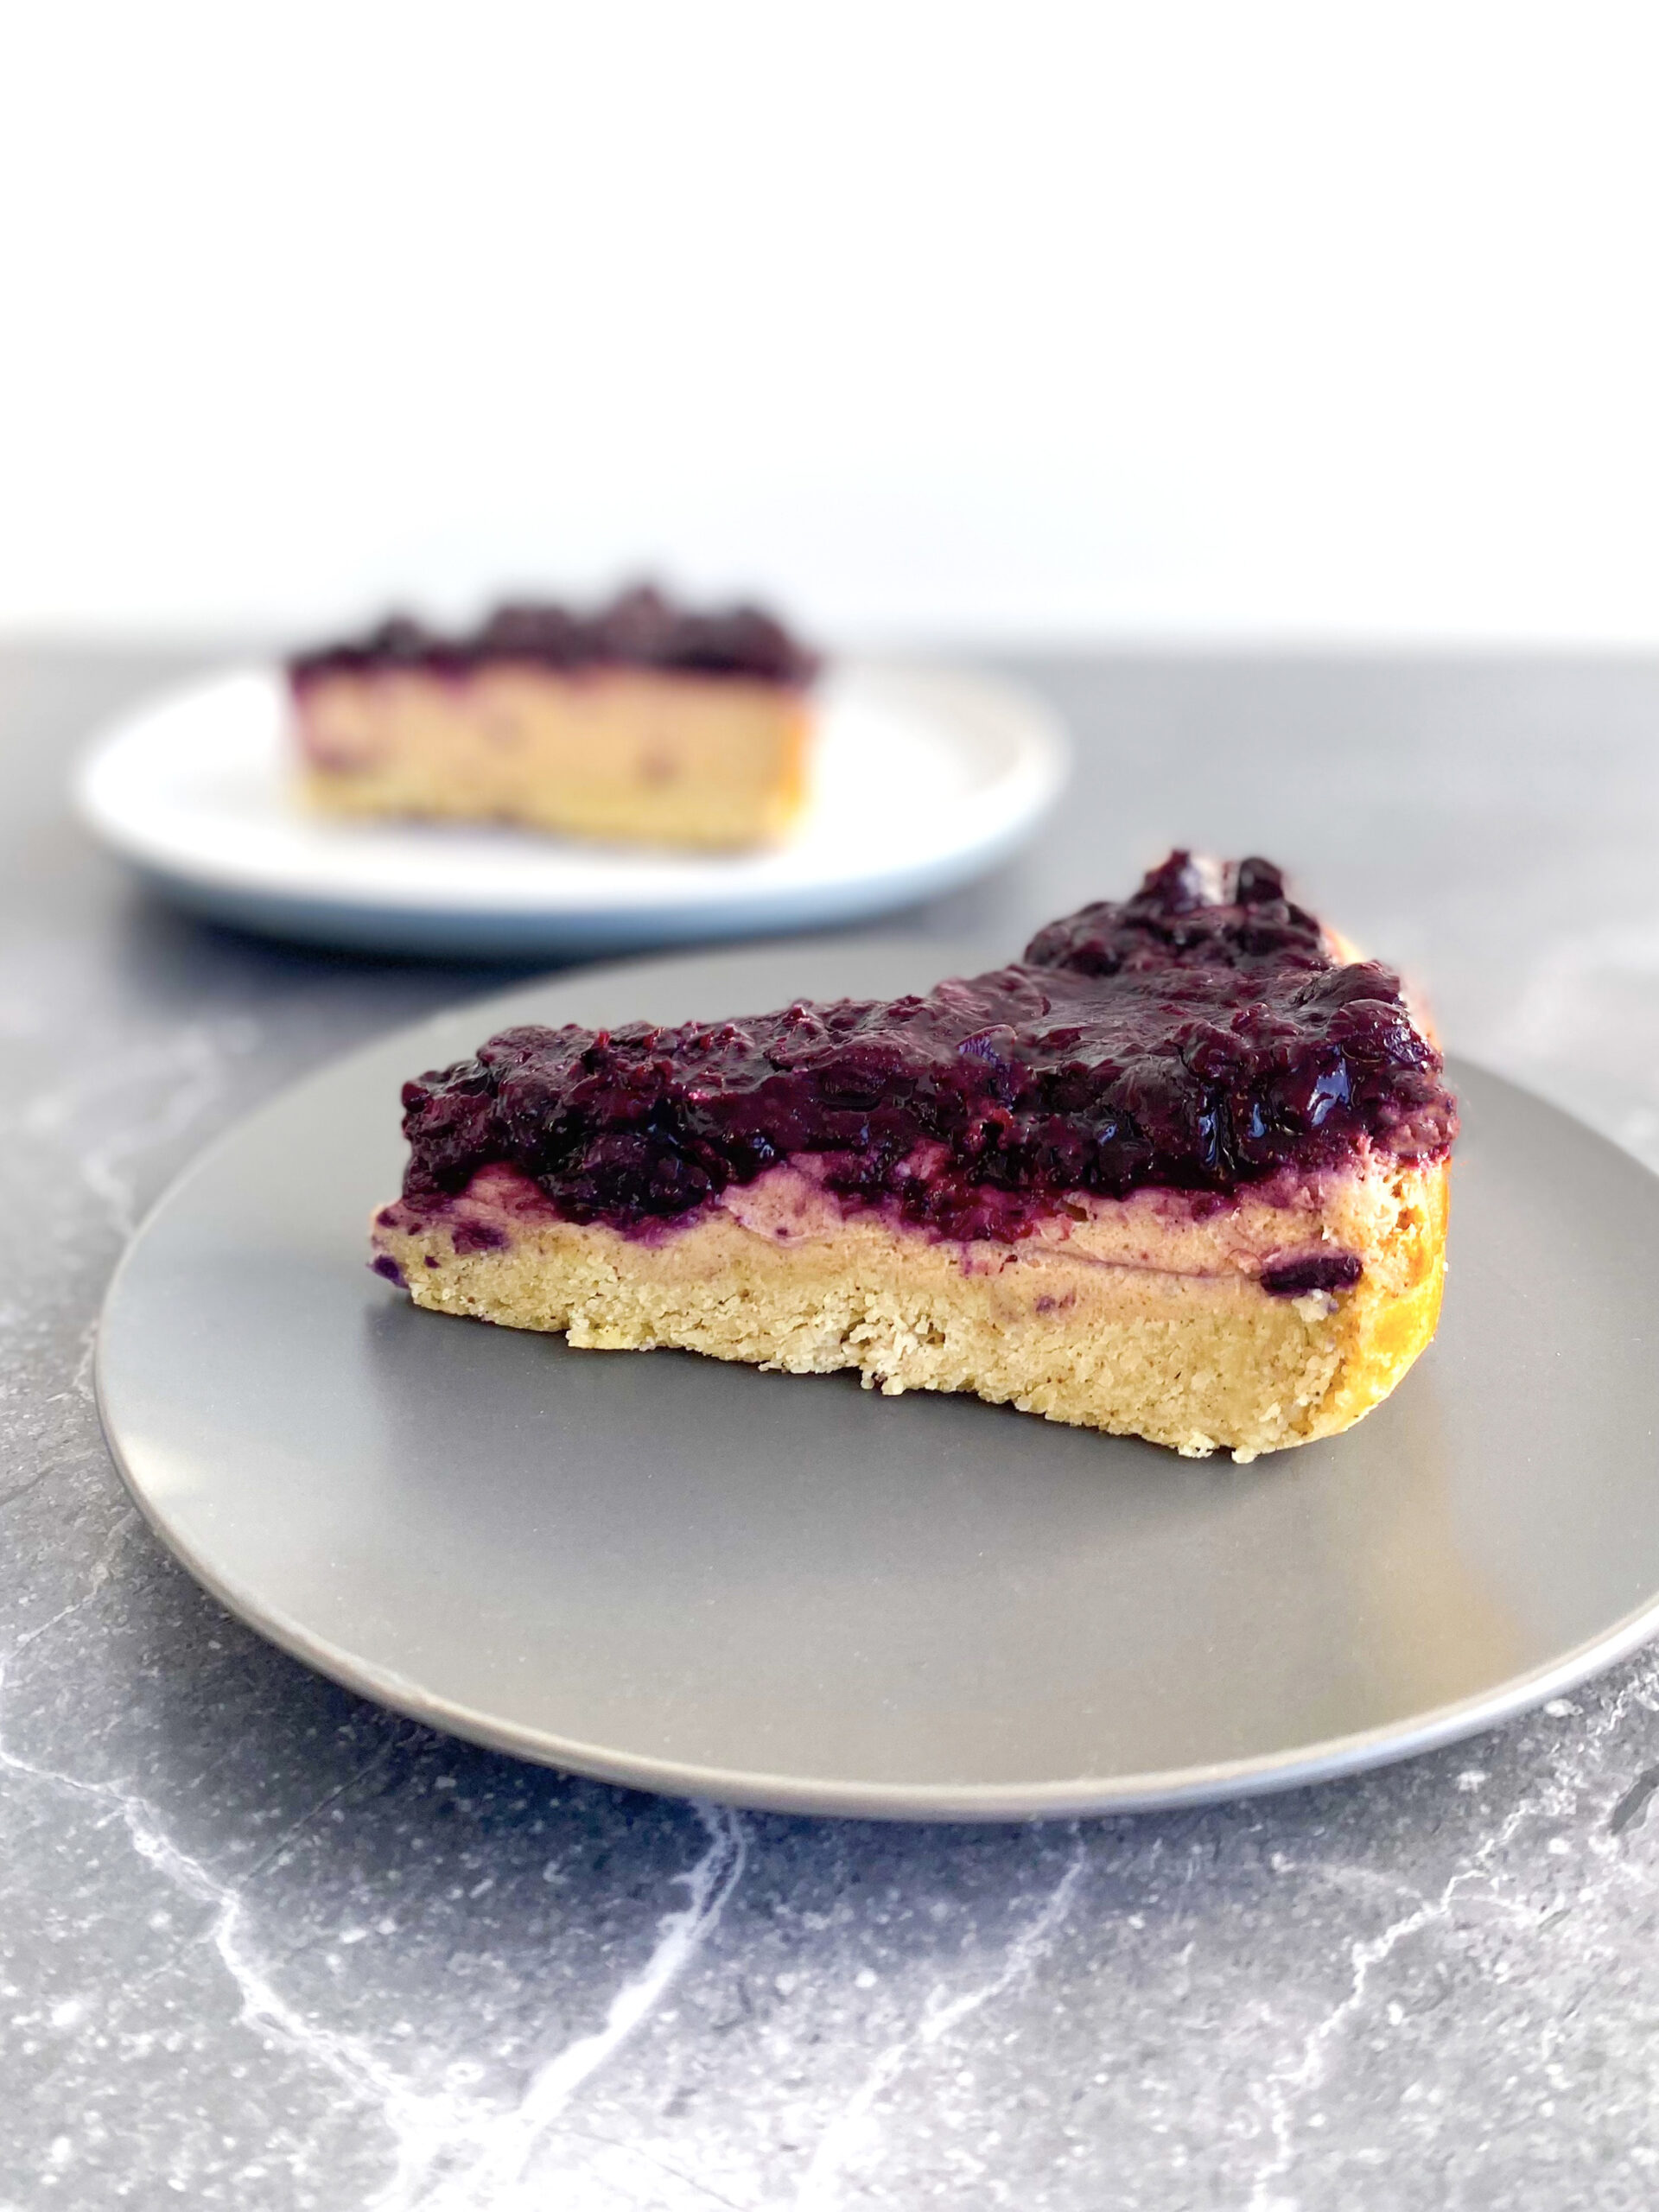 Two slices of Vegan Blueberry Cheesecake on two plates